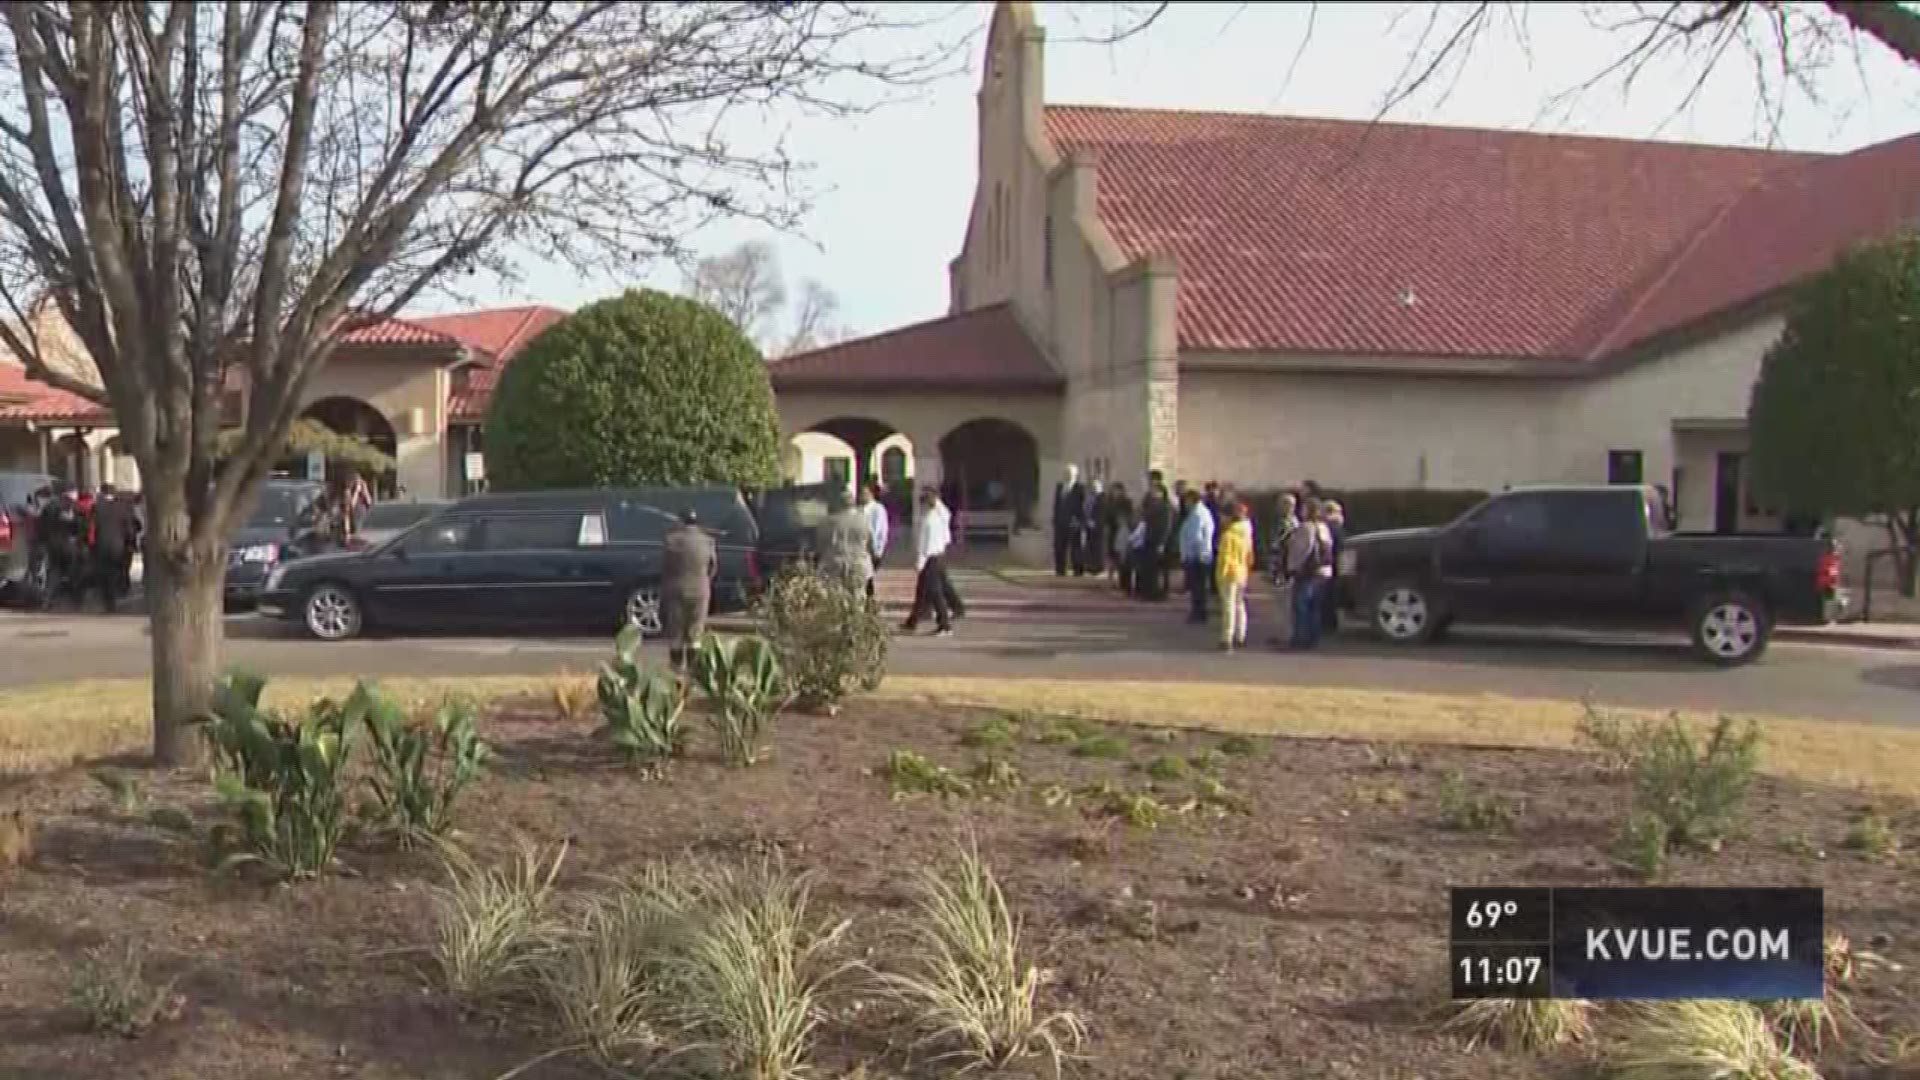 Funeral for murdered, mutilated 5-year-old